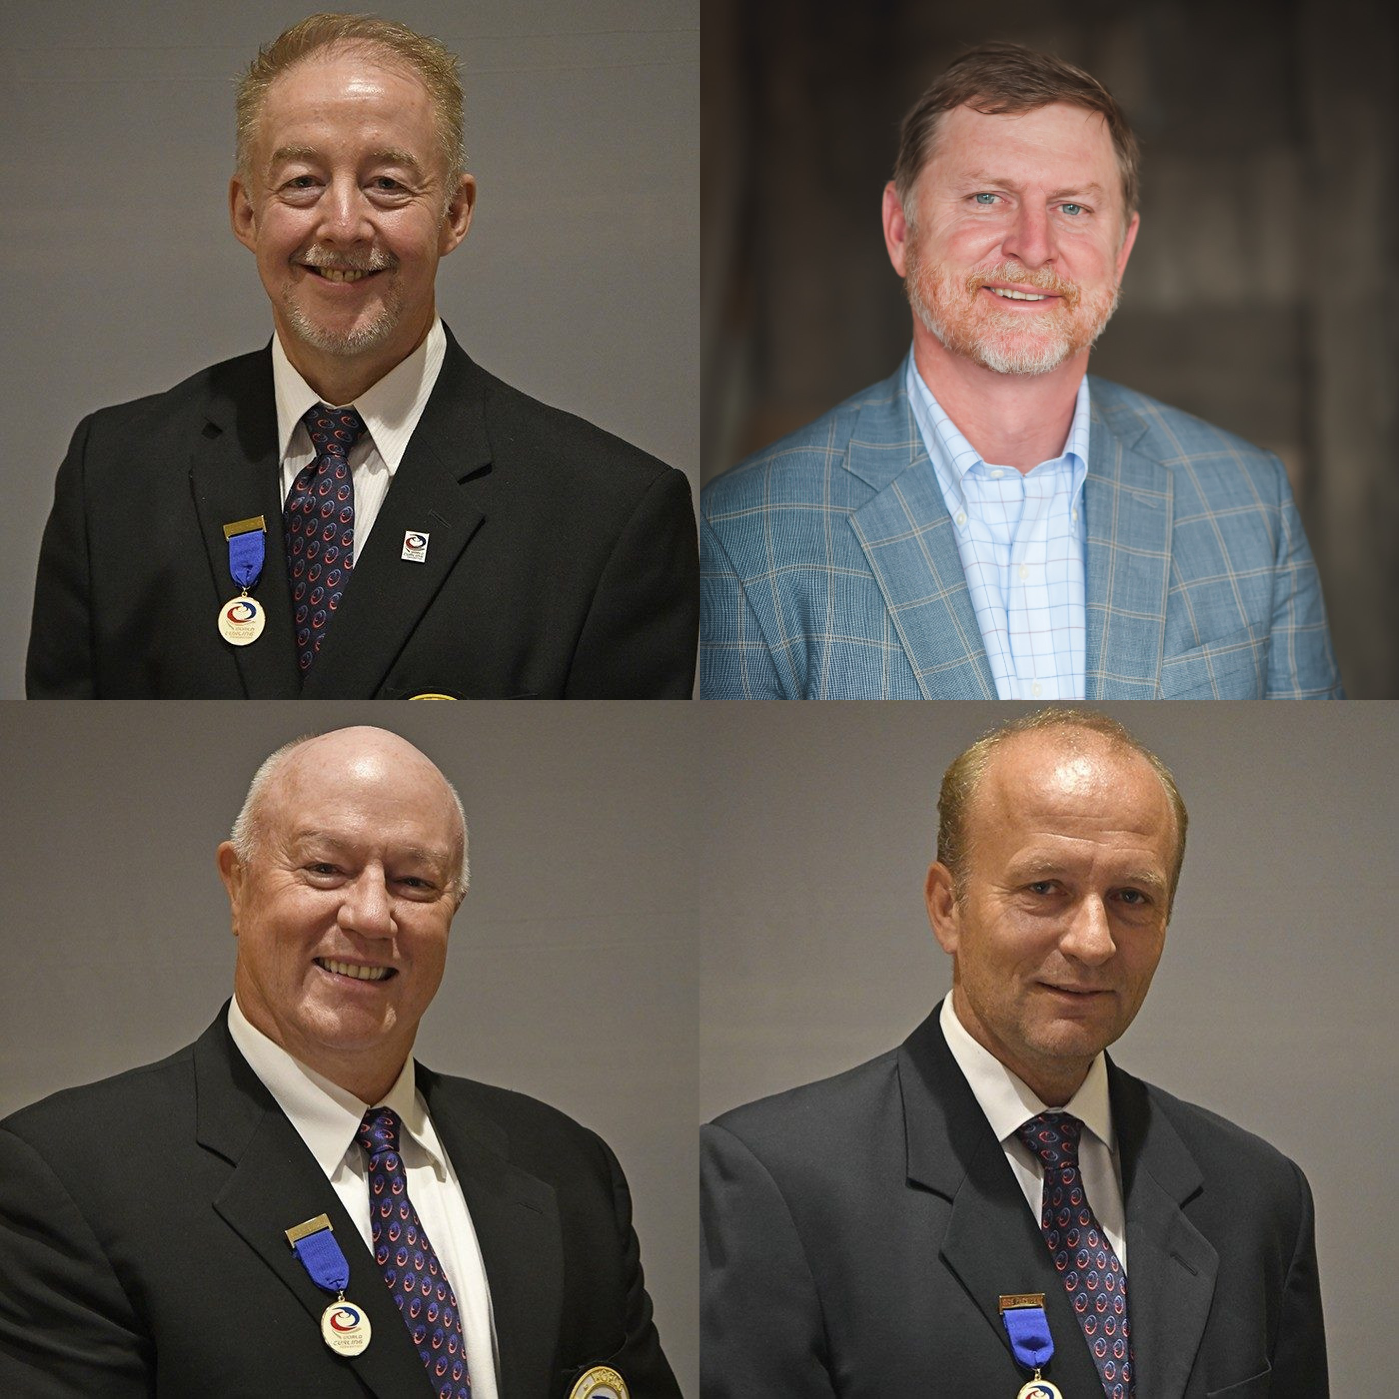 Graham Prouse, Beau Welling, Bent Ånund Ramsfjell and Hugh Millikin, clockwise from top left, all want to World Curling Federation President ©ITG